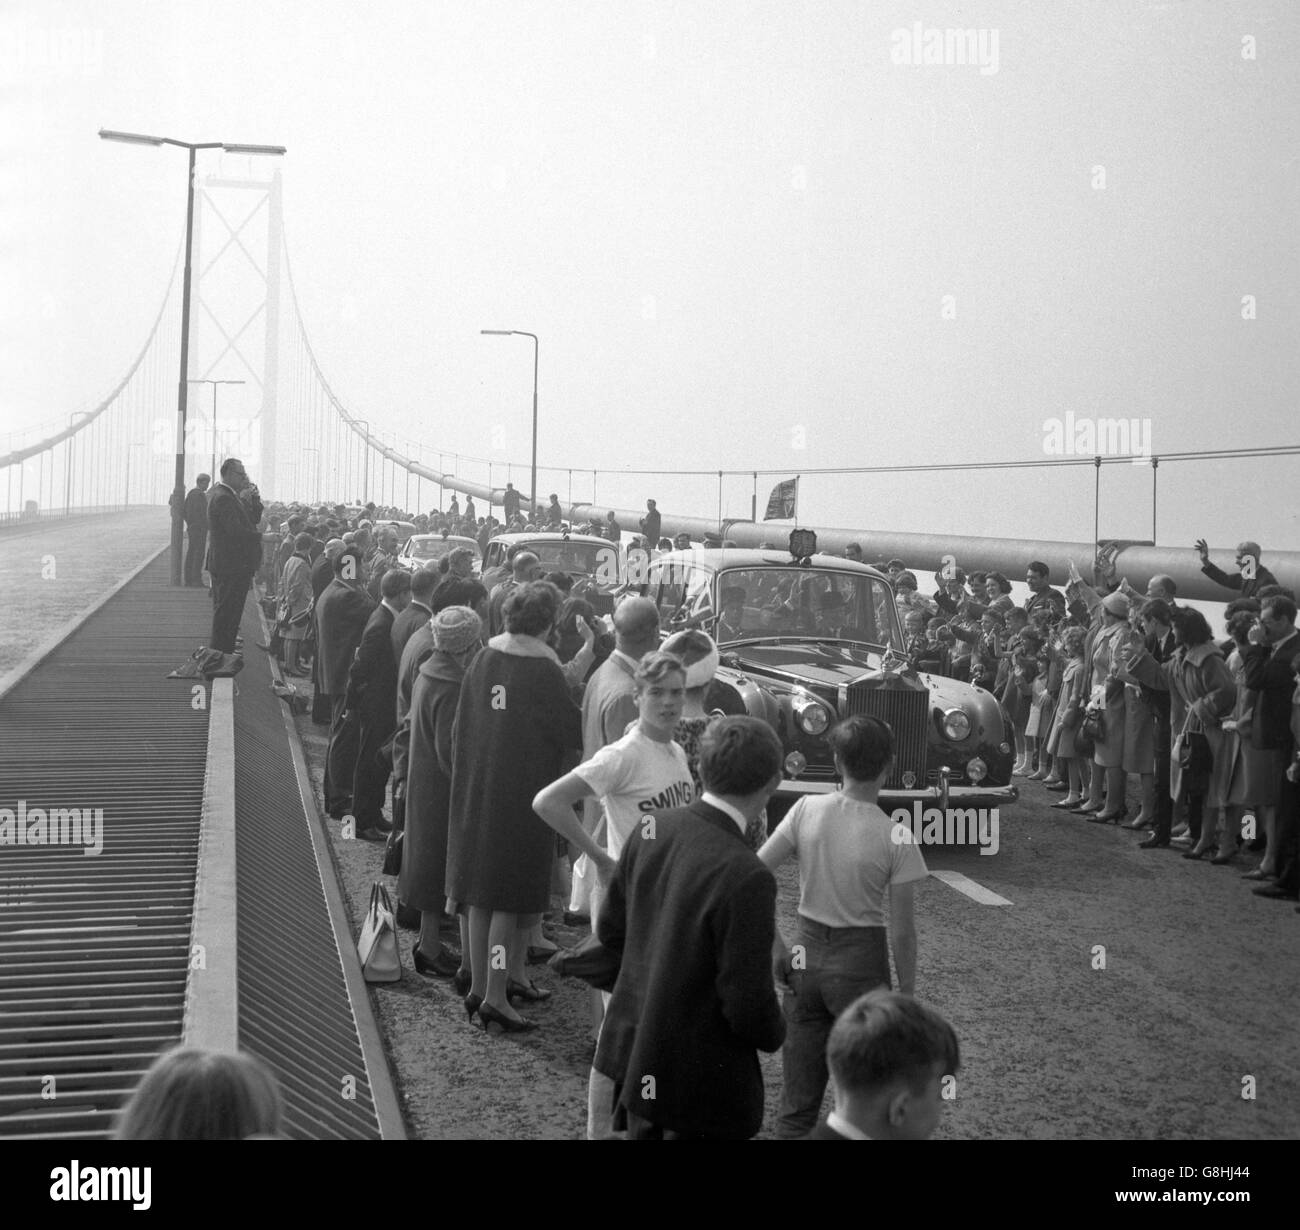 The Queen's car passes through cheering crowds as she travels over the Forth Road Bridge after performing the opening ceremony. The structure is the longest single-span suspension bridge in Europe and the fourth largest in the world. Stock Photo